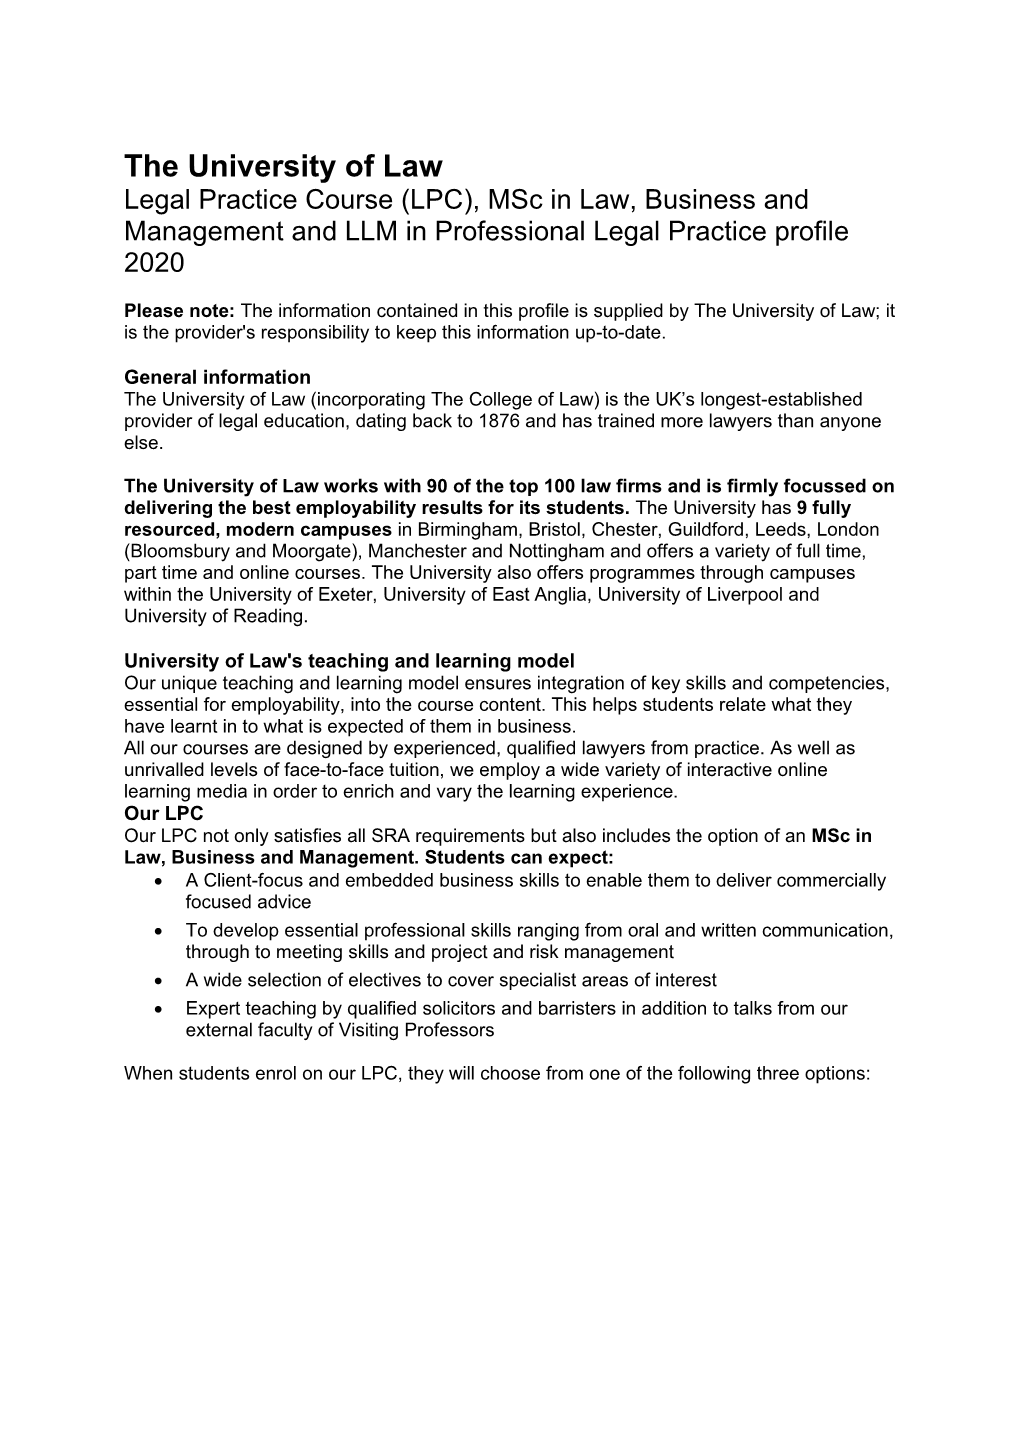 The University of Law Legal Practice Course (LPC), Msc in Law, Business and Management and LLM in Professional Legal Practice Profile 2020